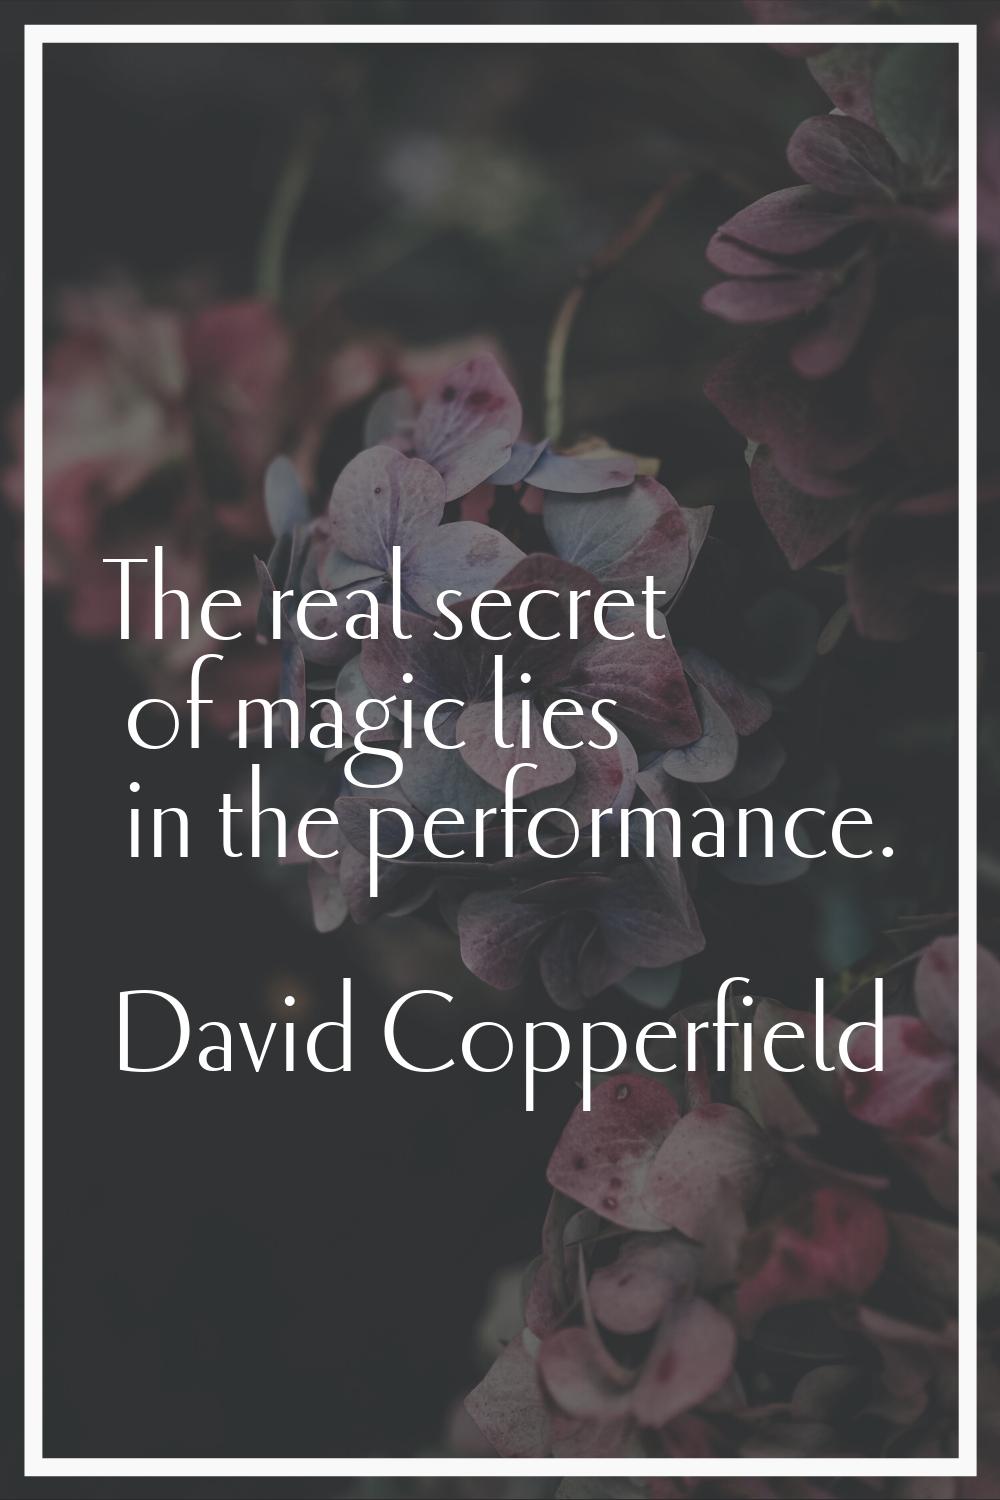 The real secret of magic lies in the performance.